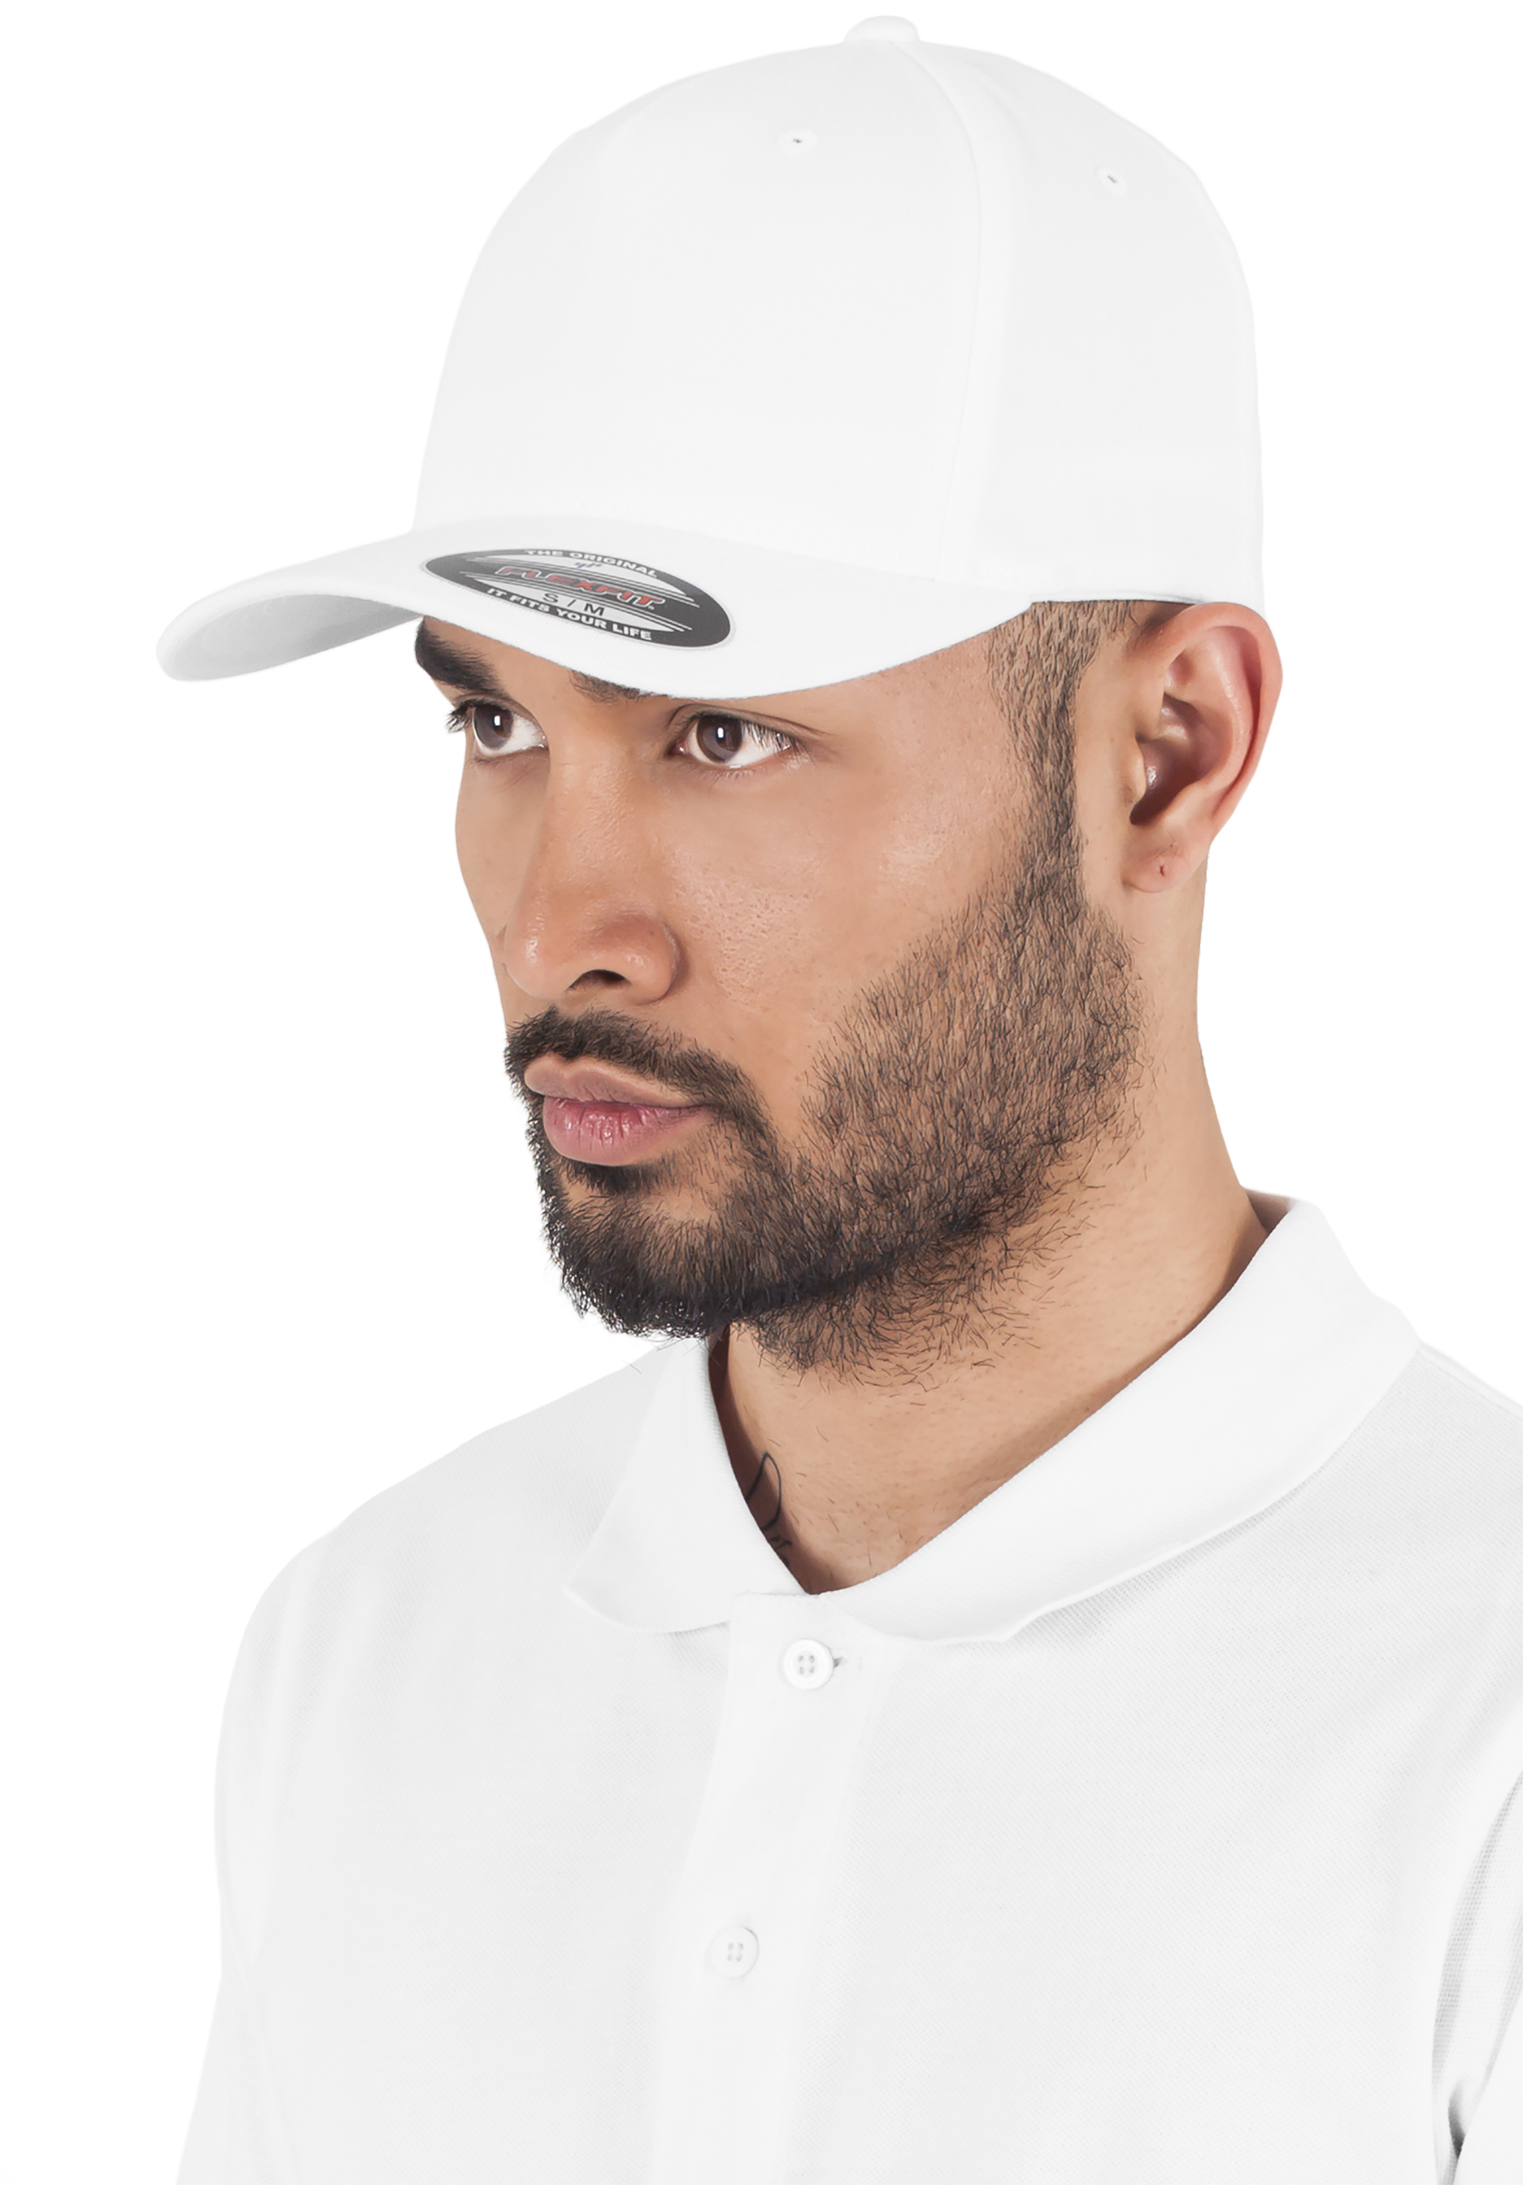 Fitted Baseball Cap